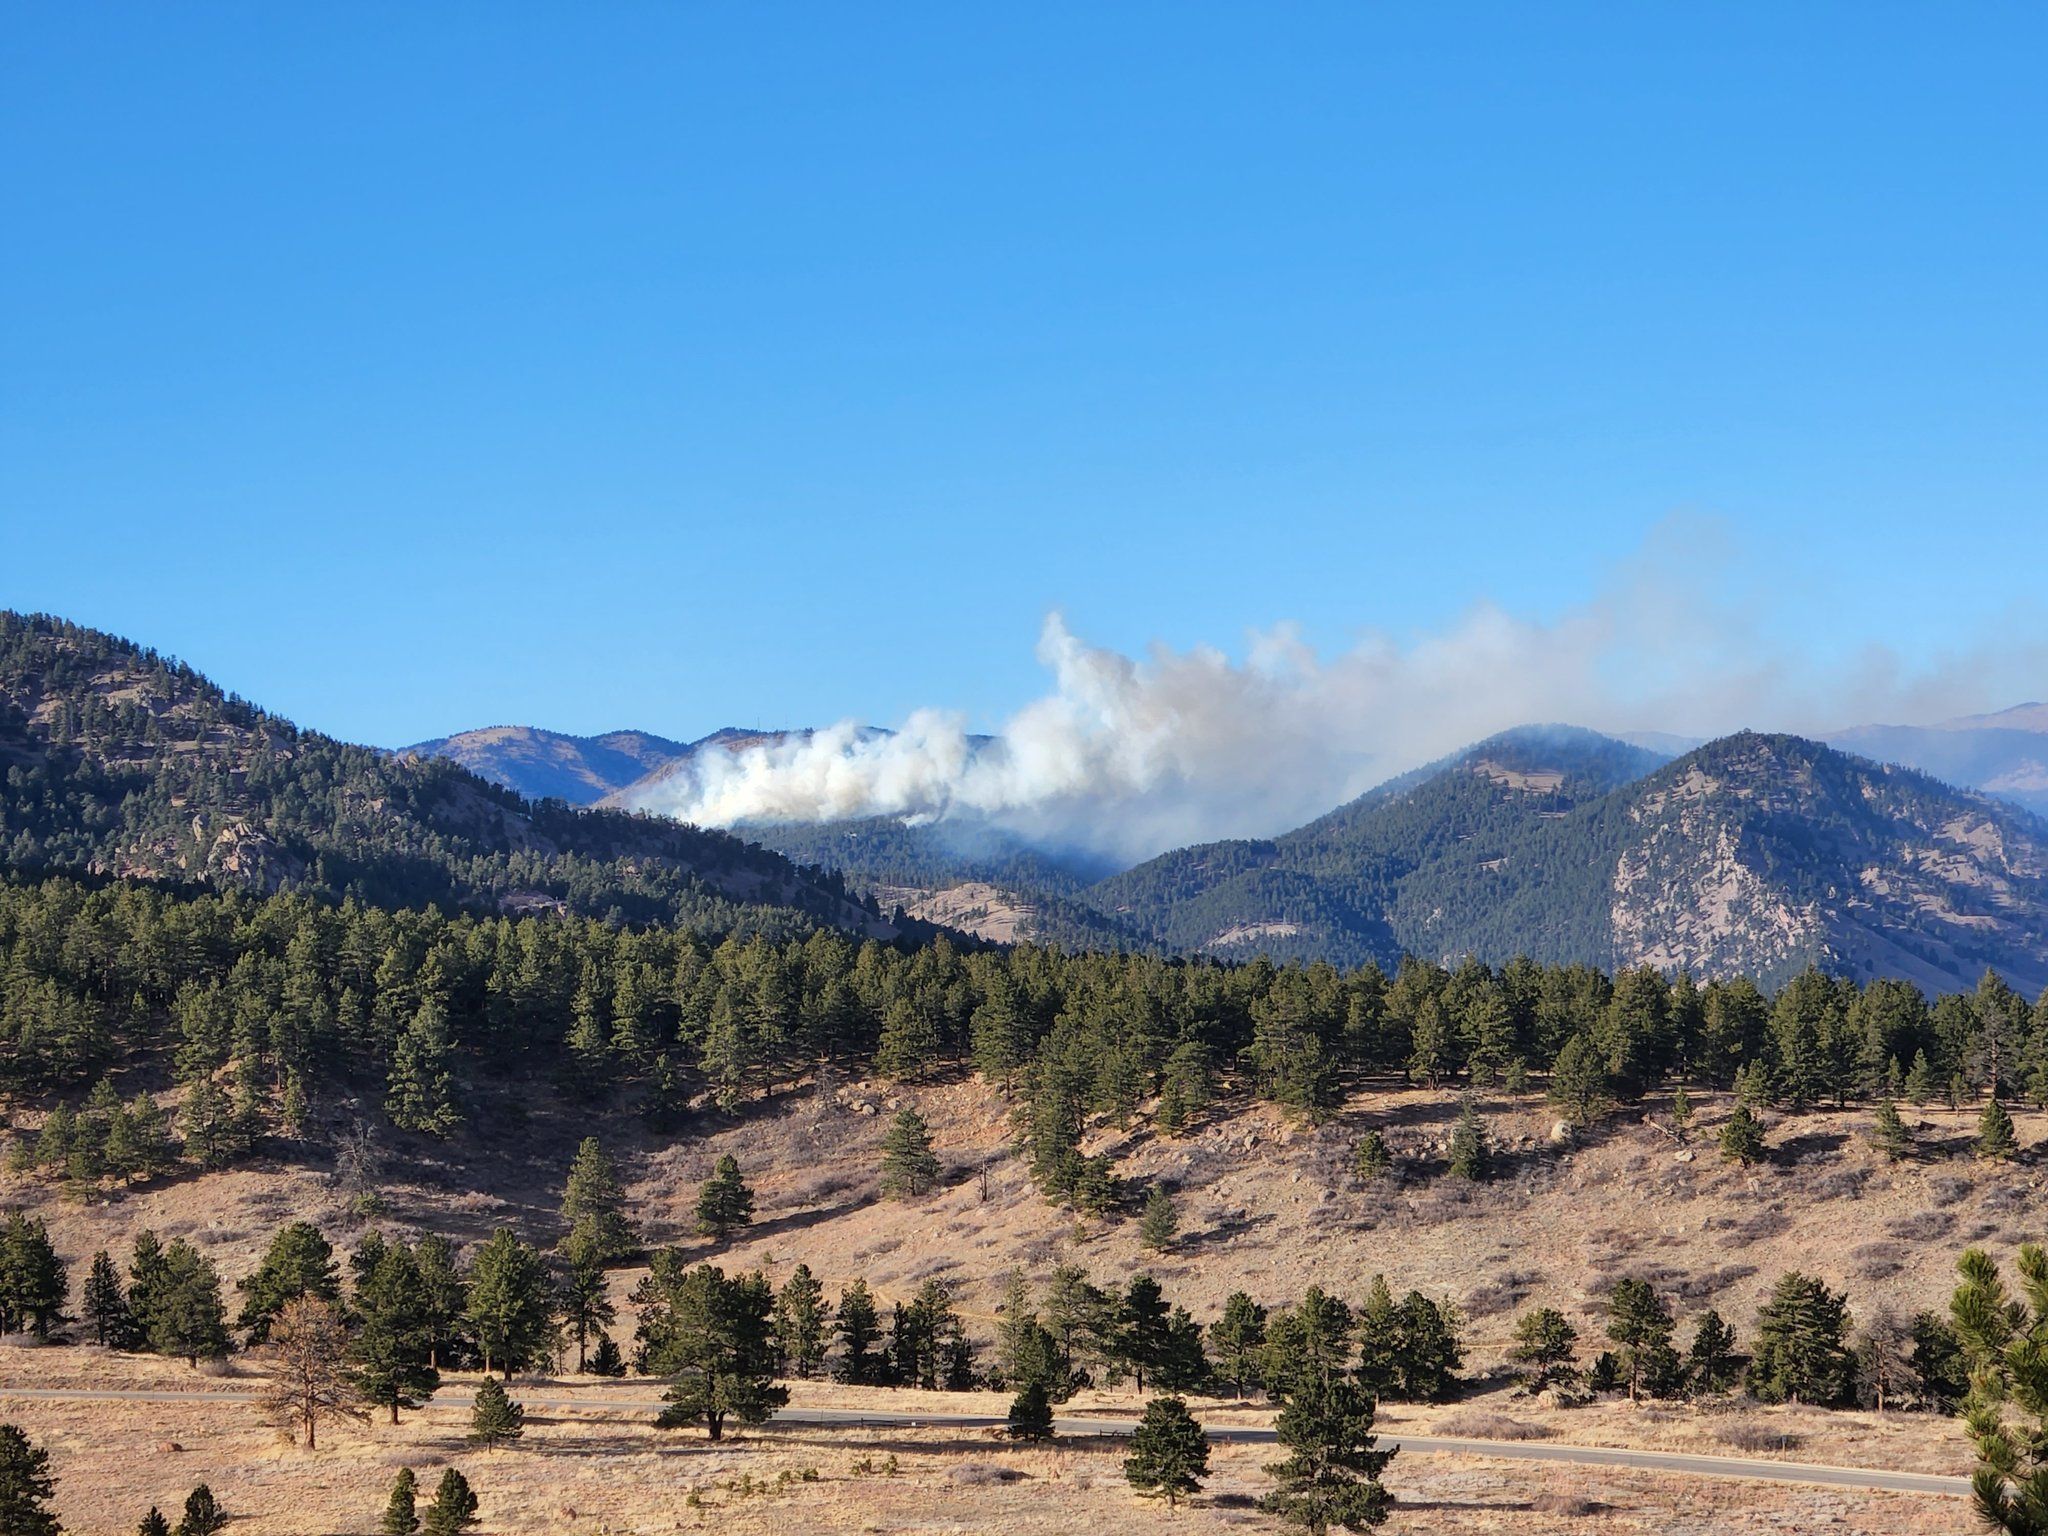 Sunshine Wildland fire: Structure blaze in Boulder County grows into 18-acre wildfire, evacuations ordered